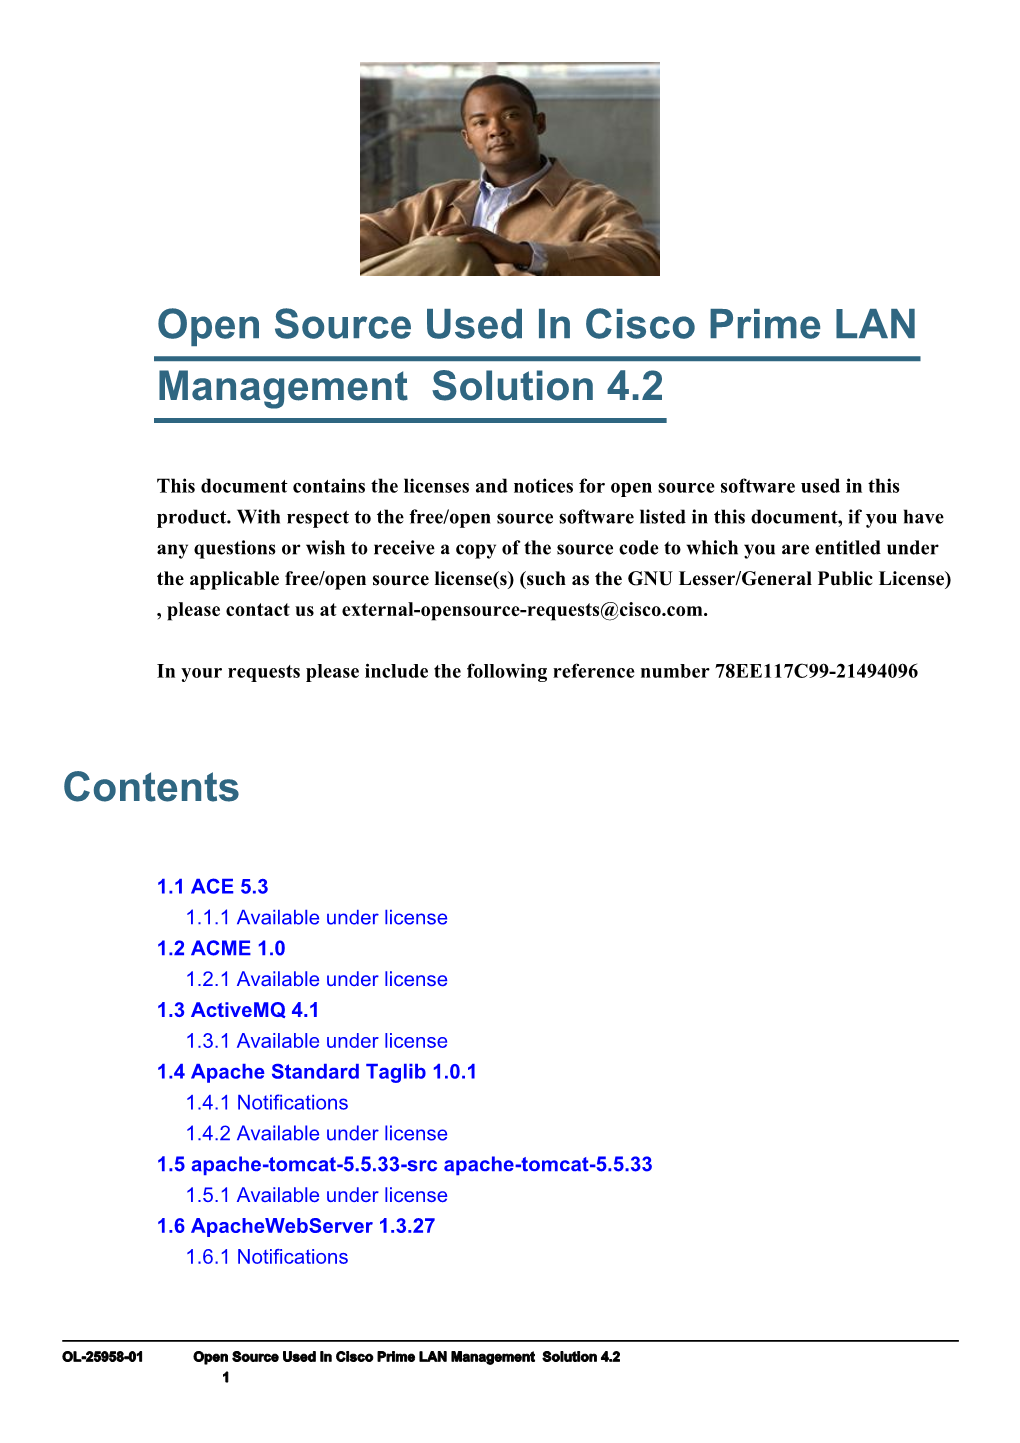 Open Source Used in Cisco Prime LAN Management Solution 4.2